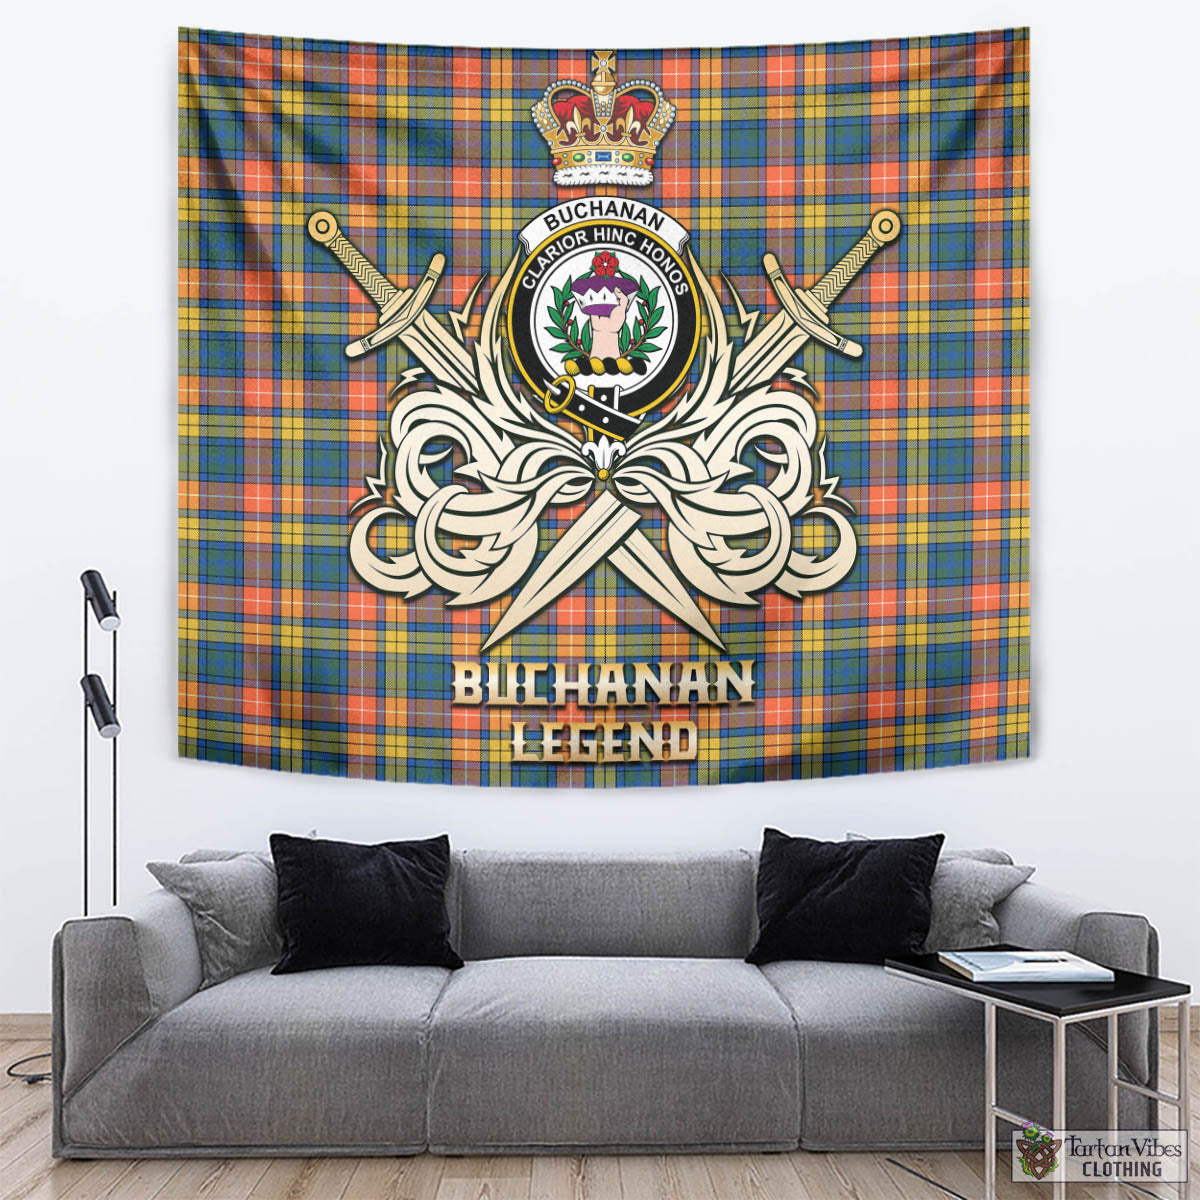 Tartan Vibes Clothing Buchanan Ancient Tartan Tapestry with Clan Crest and the Golden Sword of Courageous Legacy